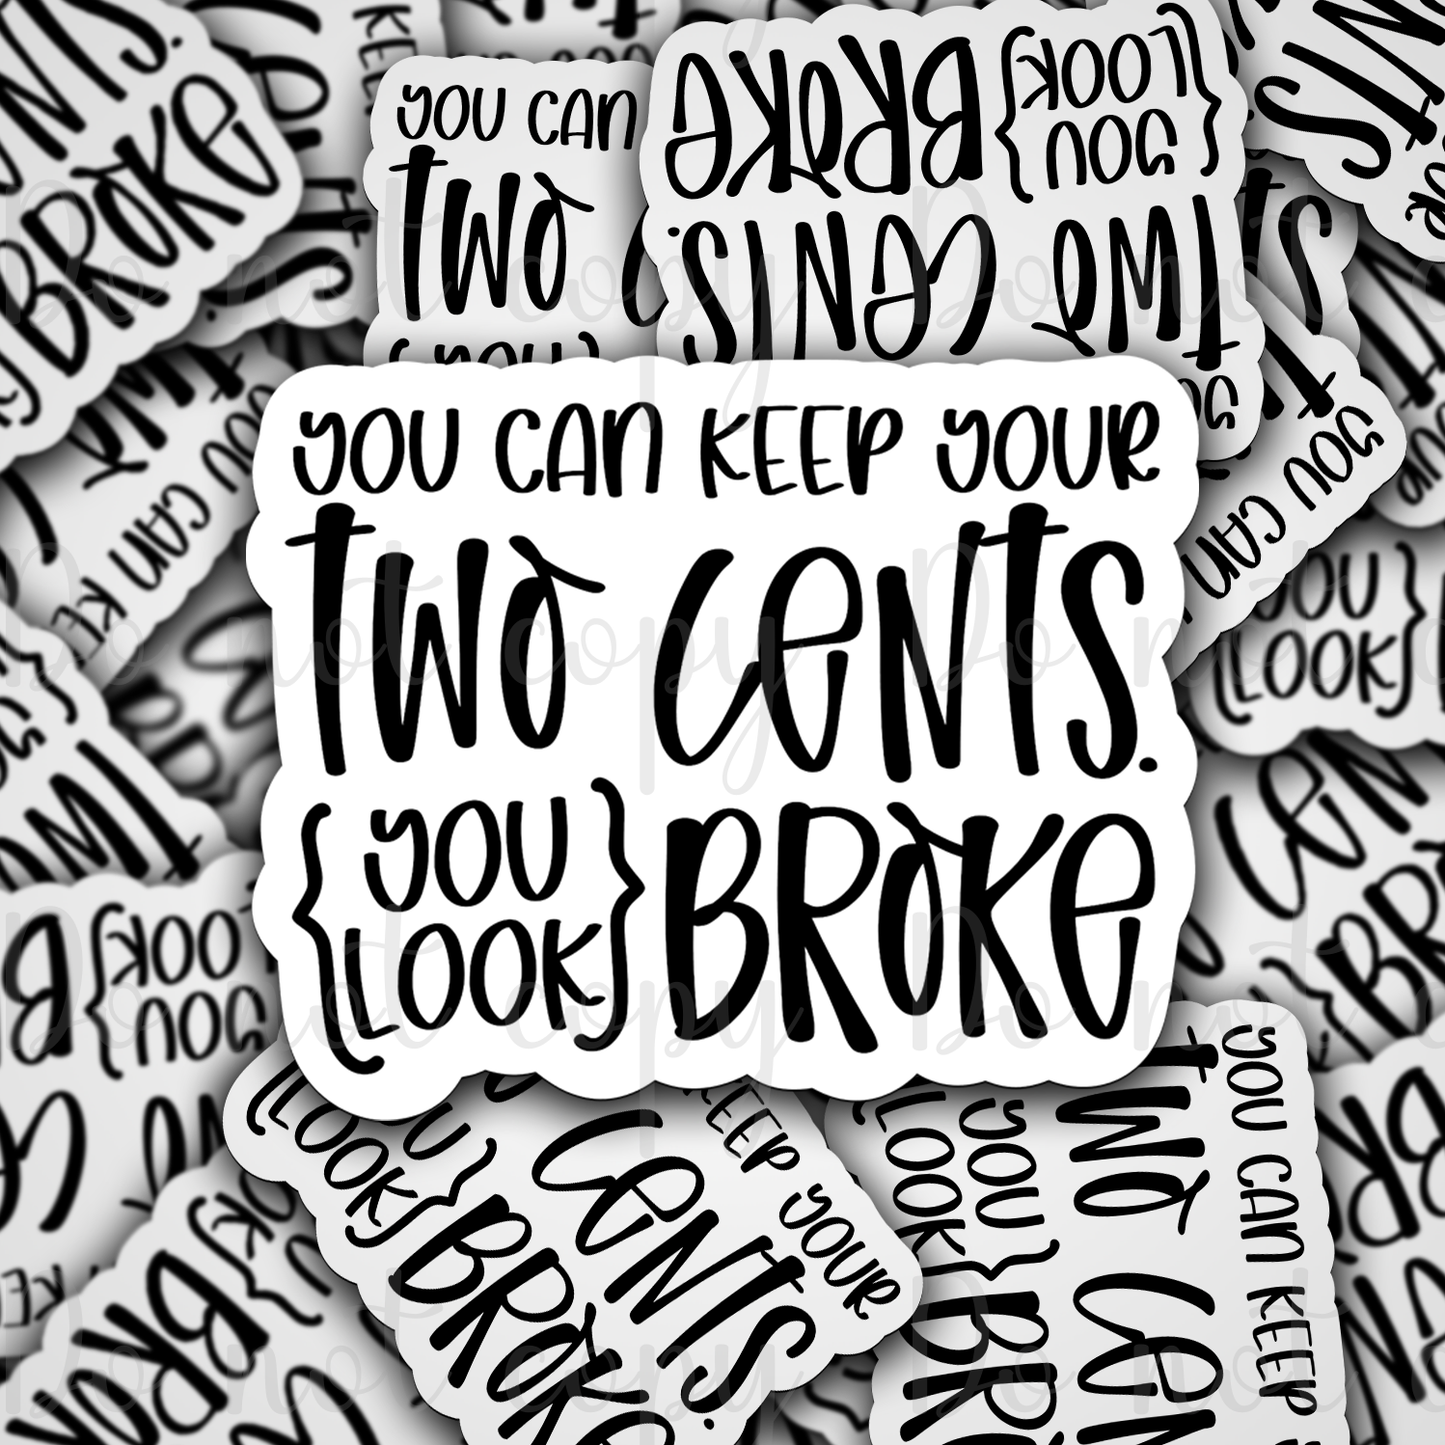 You can keep your two cents you look broke Die cut sticker 3-5 Business Day TAT